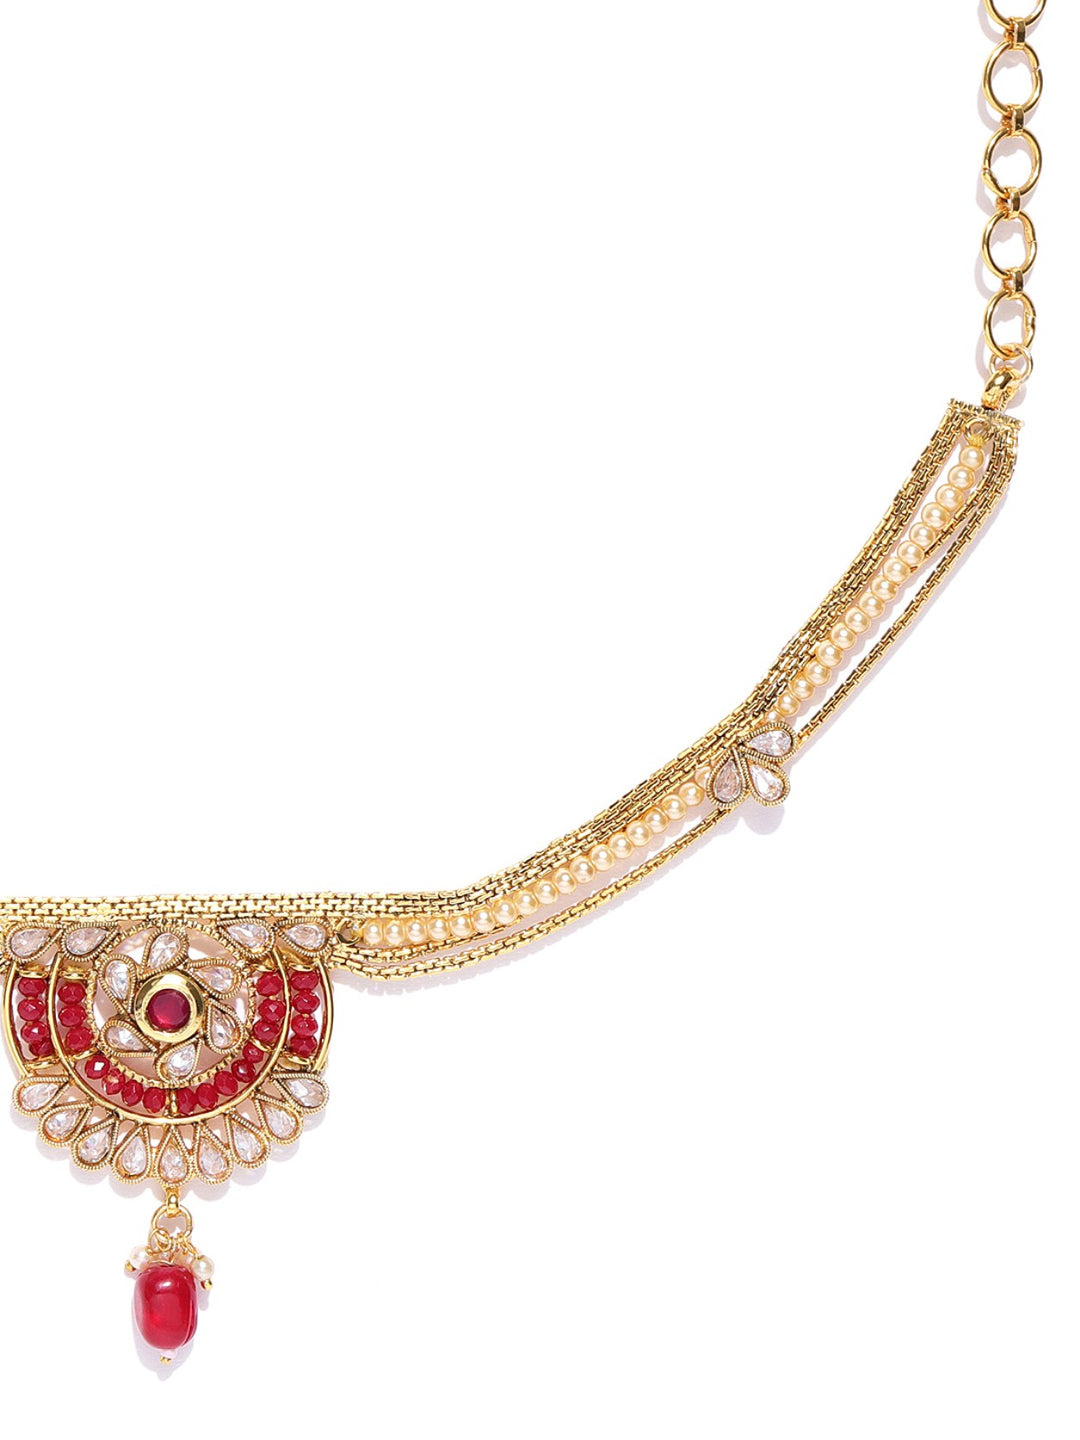 Red Colour Traditional Gold Plated Multistrand WaistBelt For Women And Girls+H1